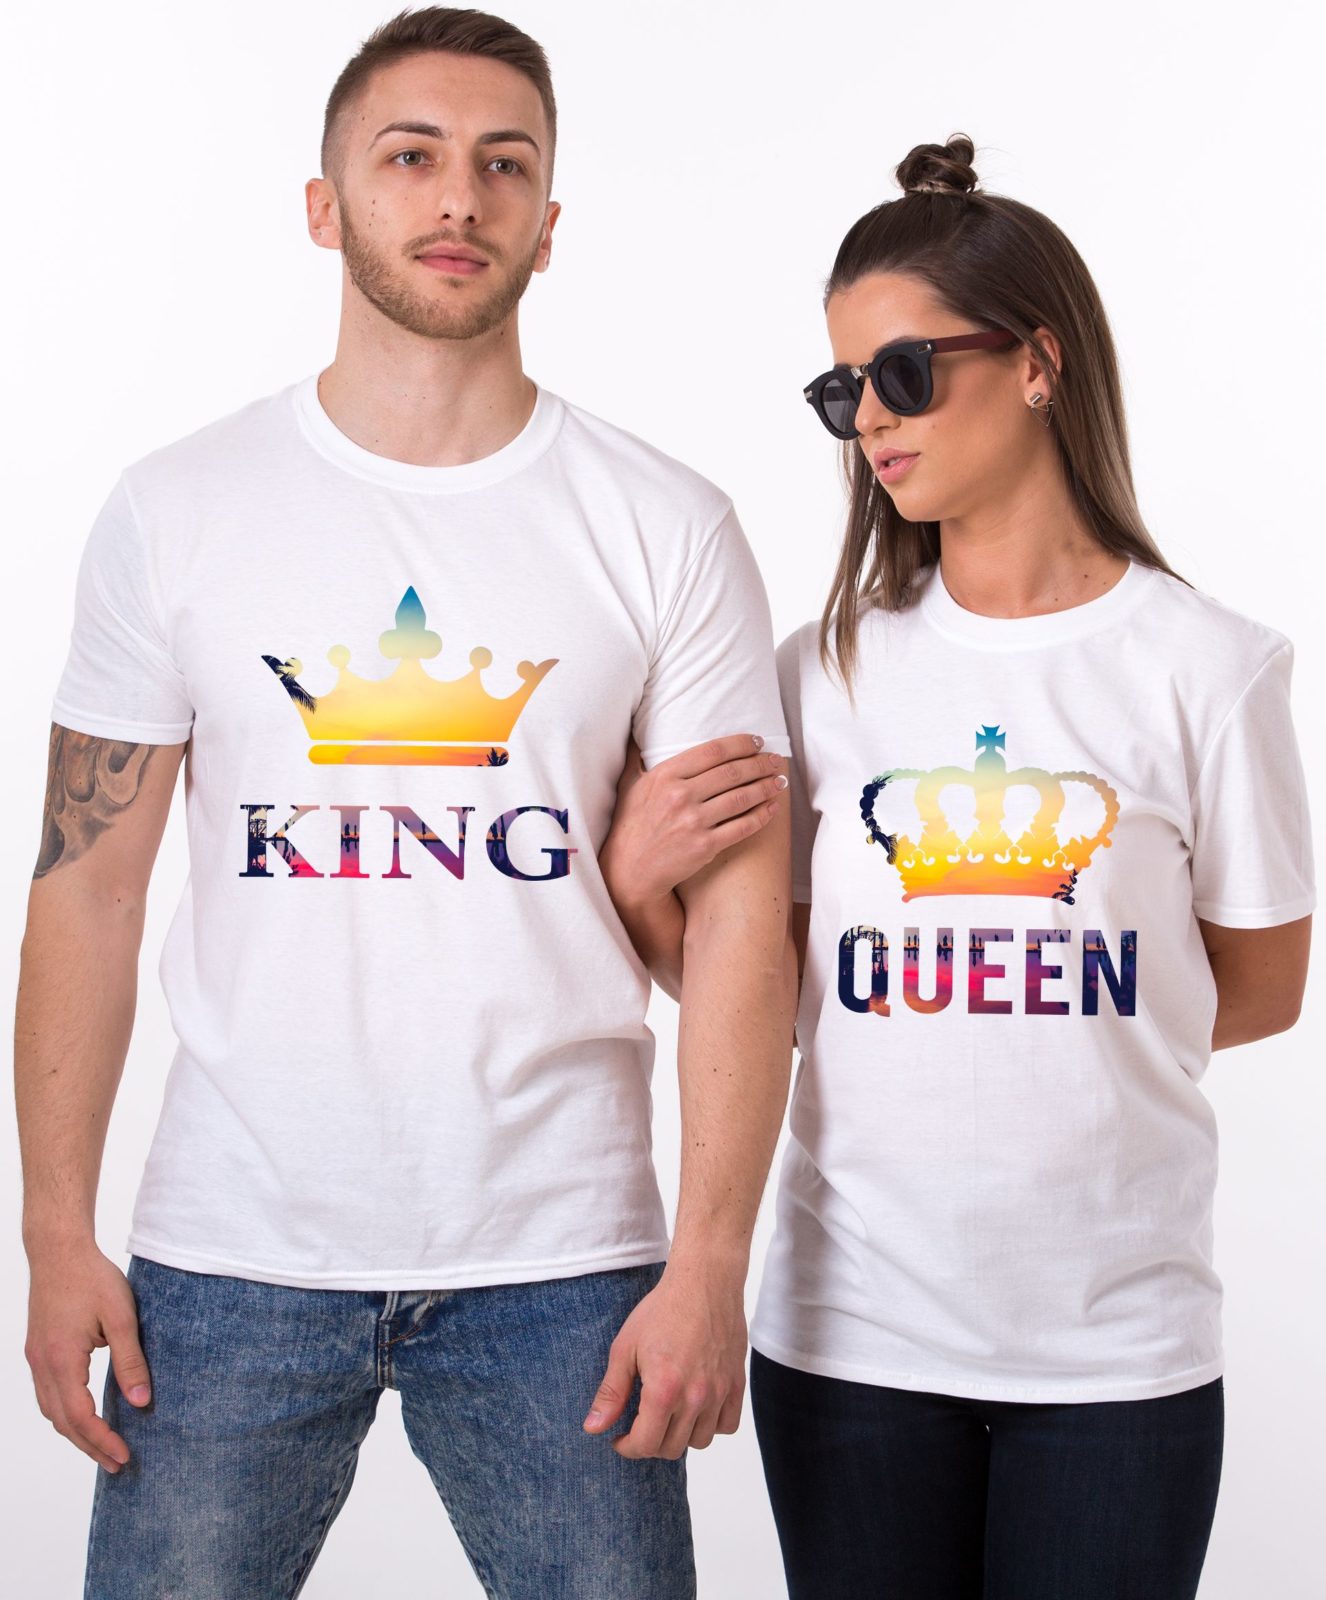 King and Queen Tropical Shirts, Crowns, Matching Couples Shirts